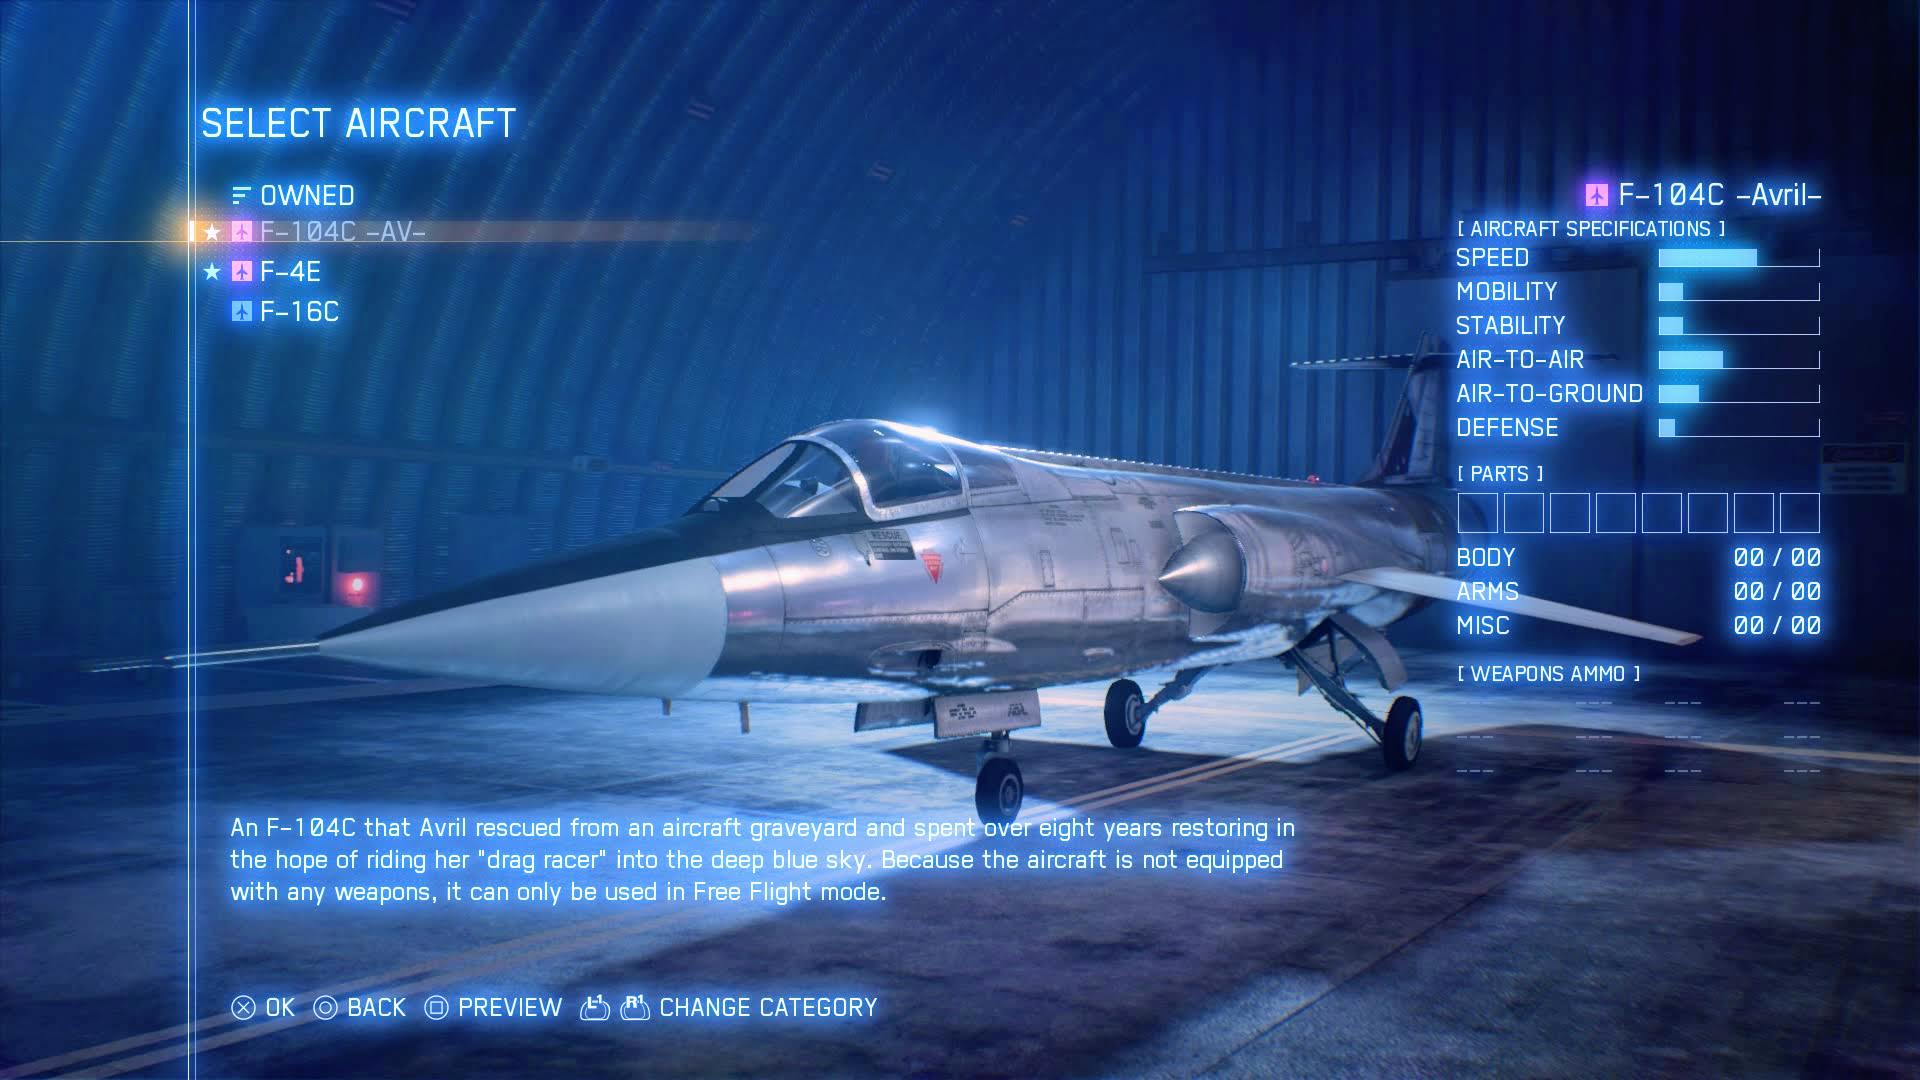 Ace Combat 7 Receives First Campaign Gameplay Footage